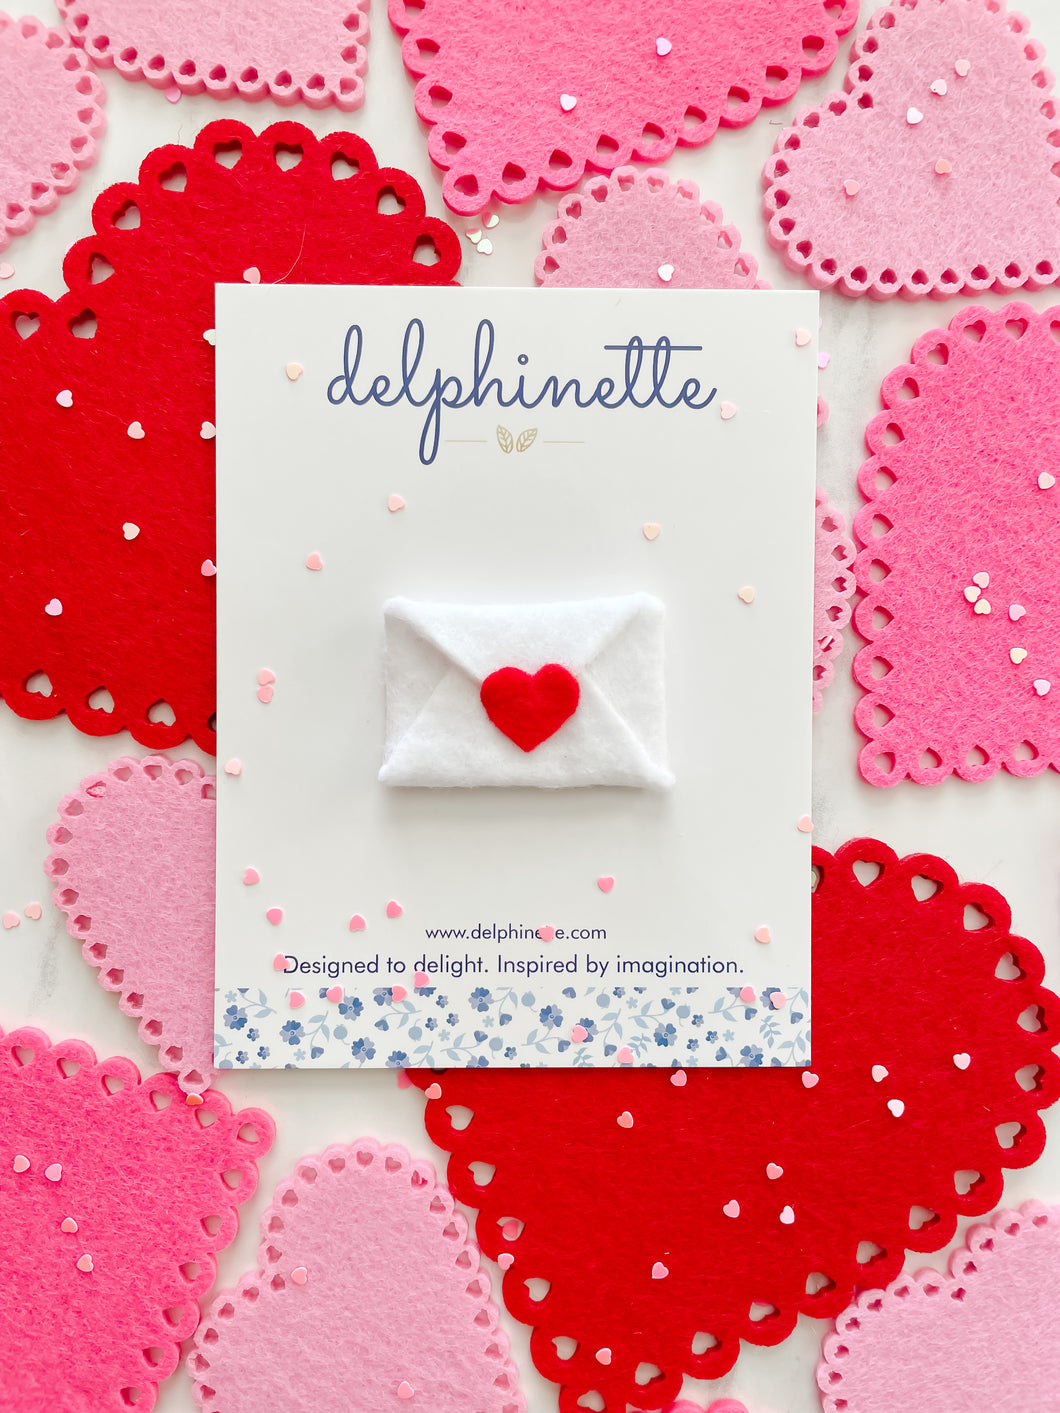 delphinette handmade felt little girl/baby girl hair accessory - a little white felt enveloped sealed with a little red heart that can be customized as a hair clip, headband or hair tie. Handmade in Canada.